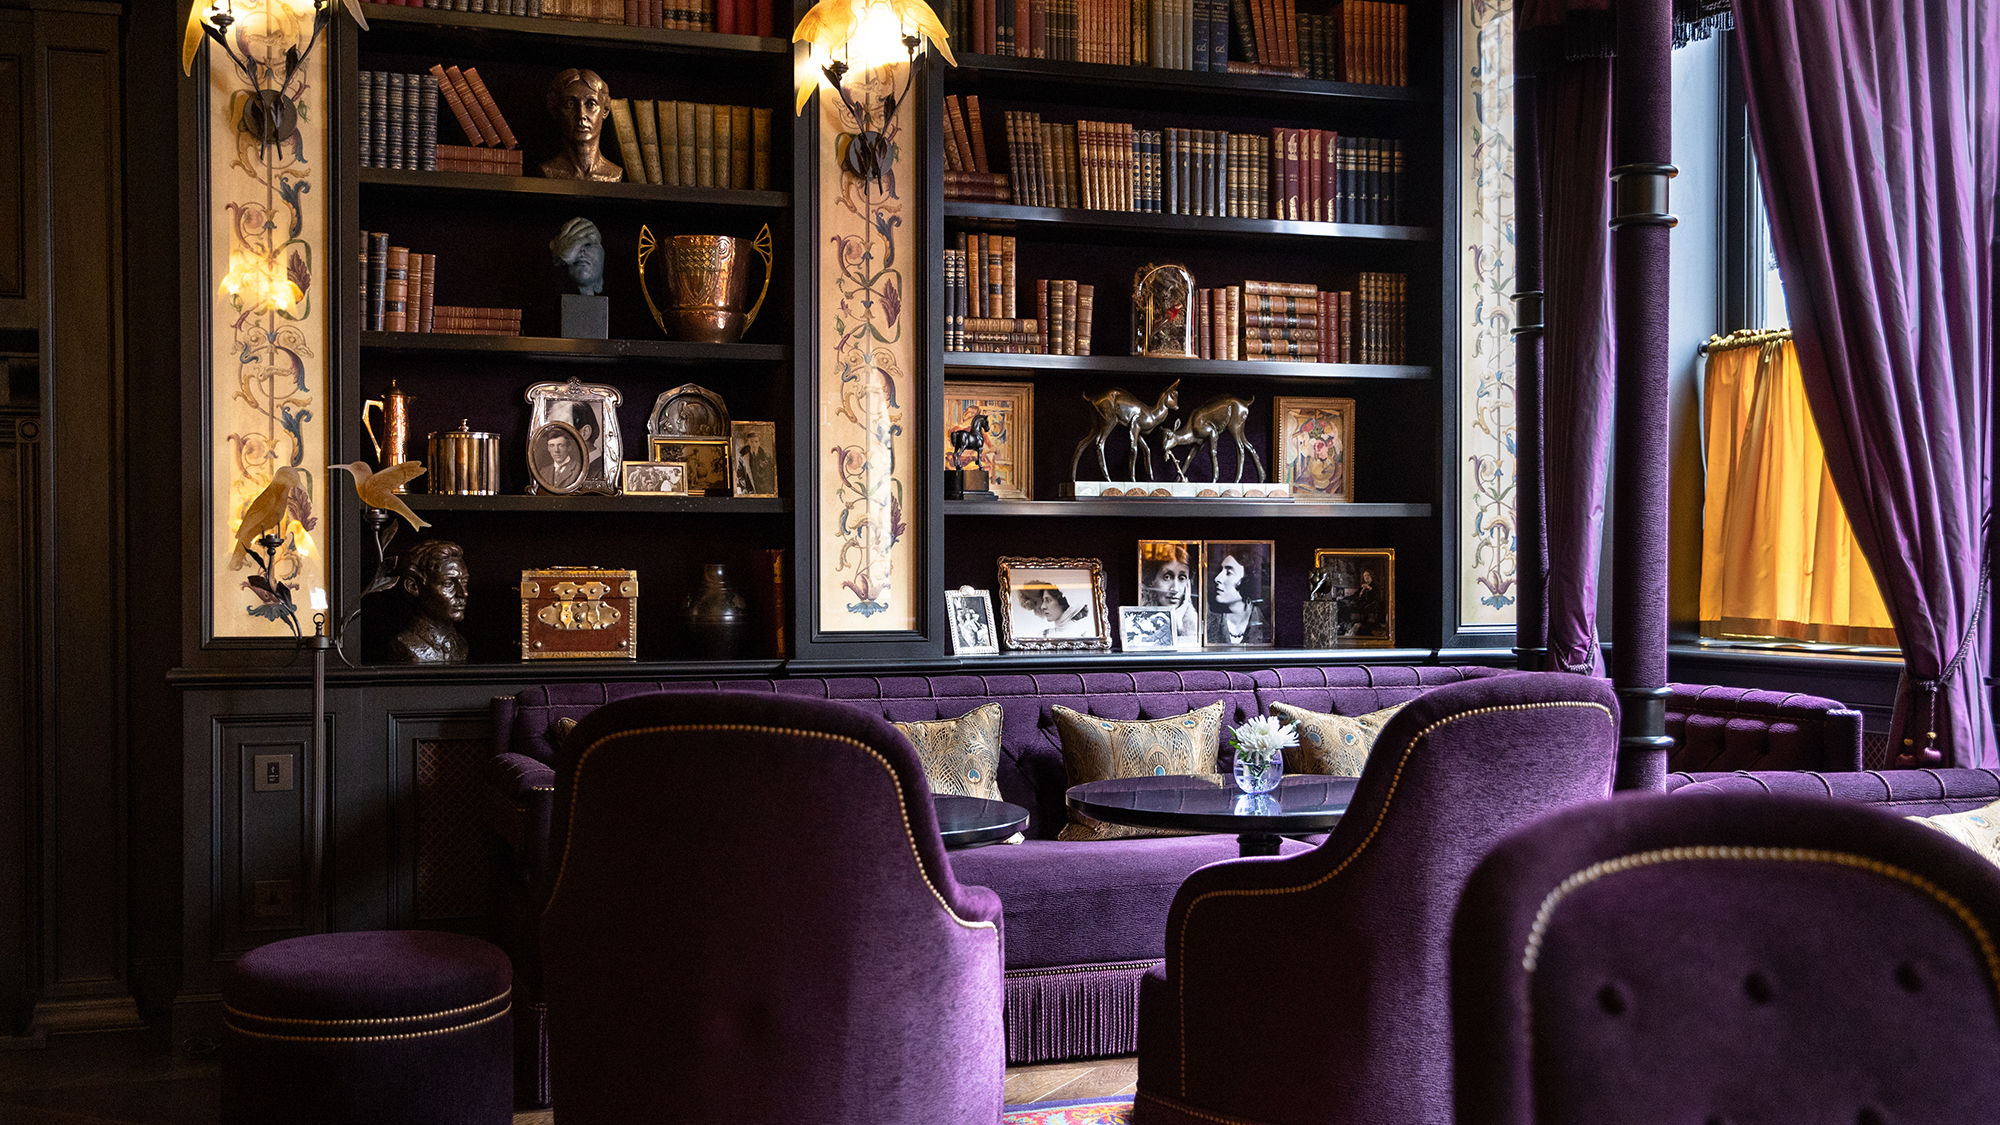 At L’oscar, a 39-room boutique hotel named for poet and playwright Oscar Wilde and located near Covent Garden, visitors can get a map of shops that hold royal warrants.